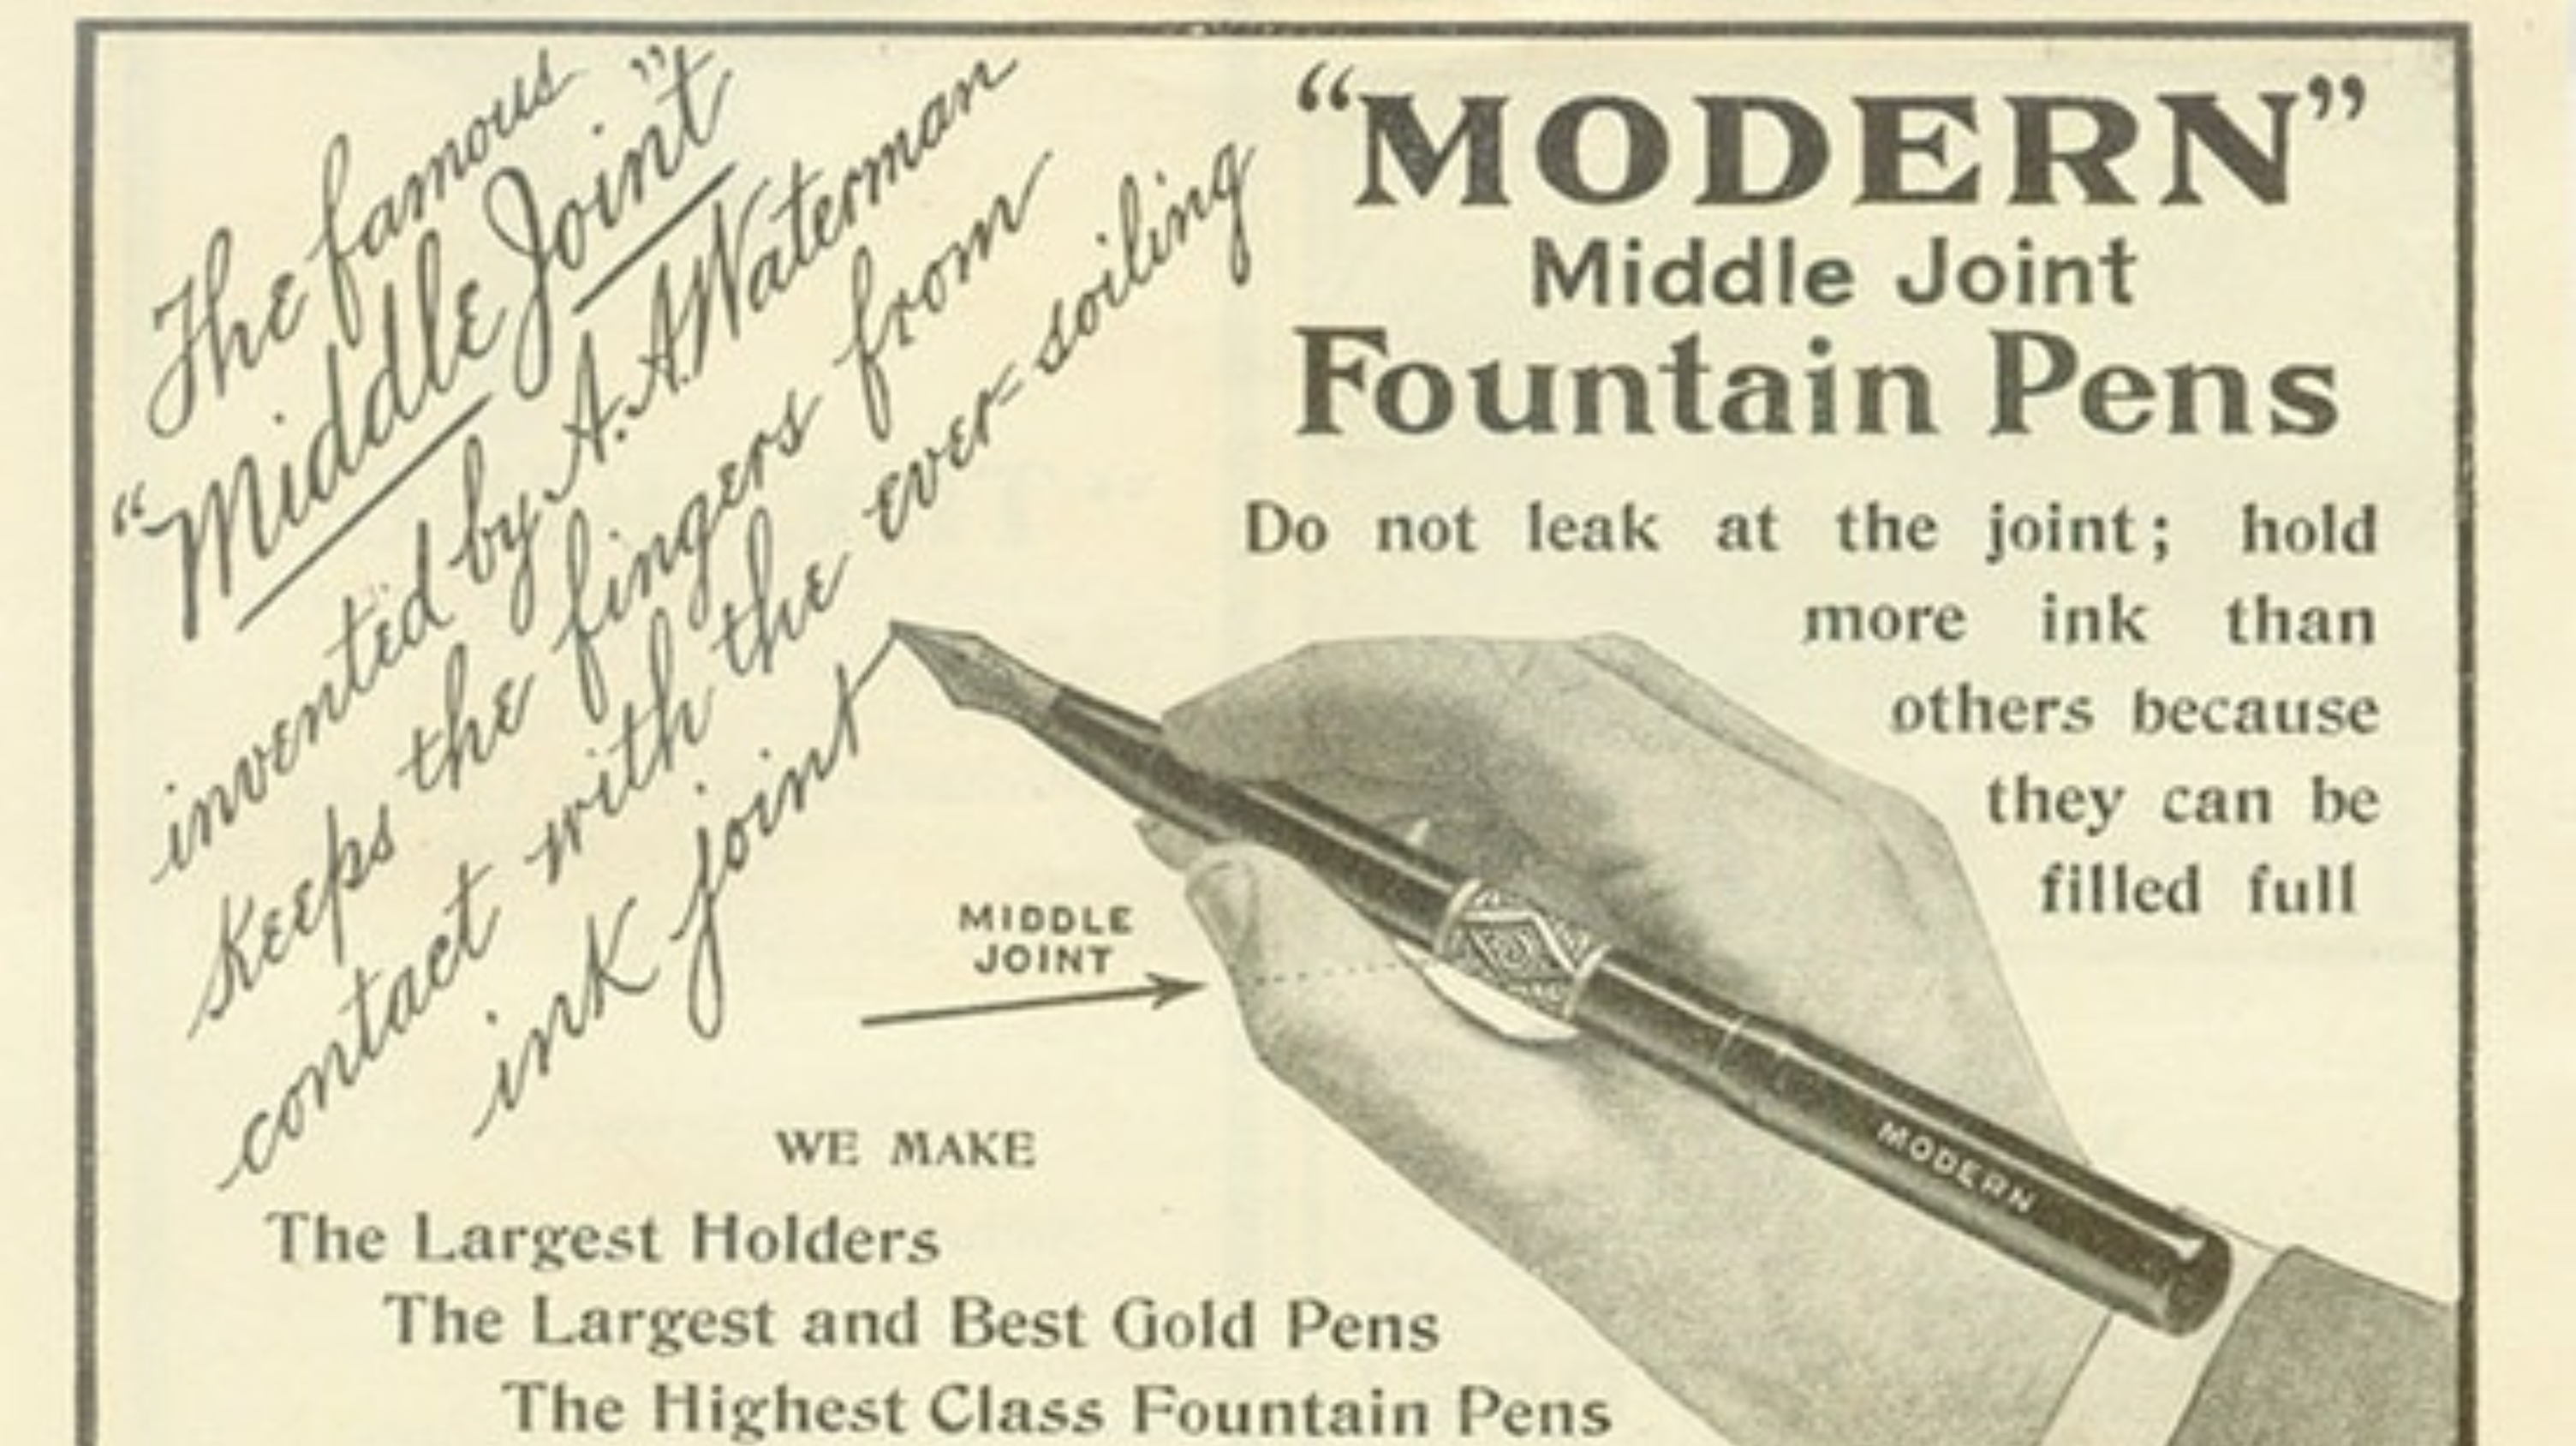 Who Invented the Fountain Pen?